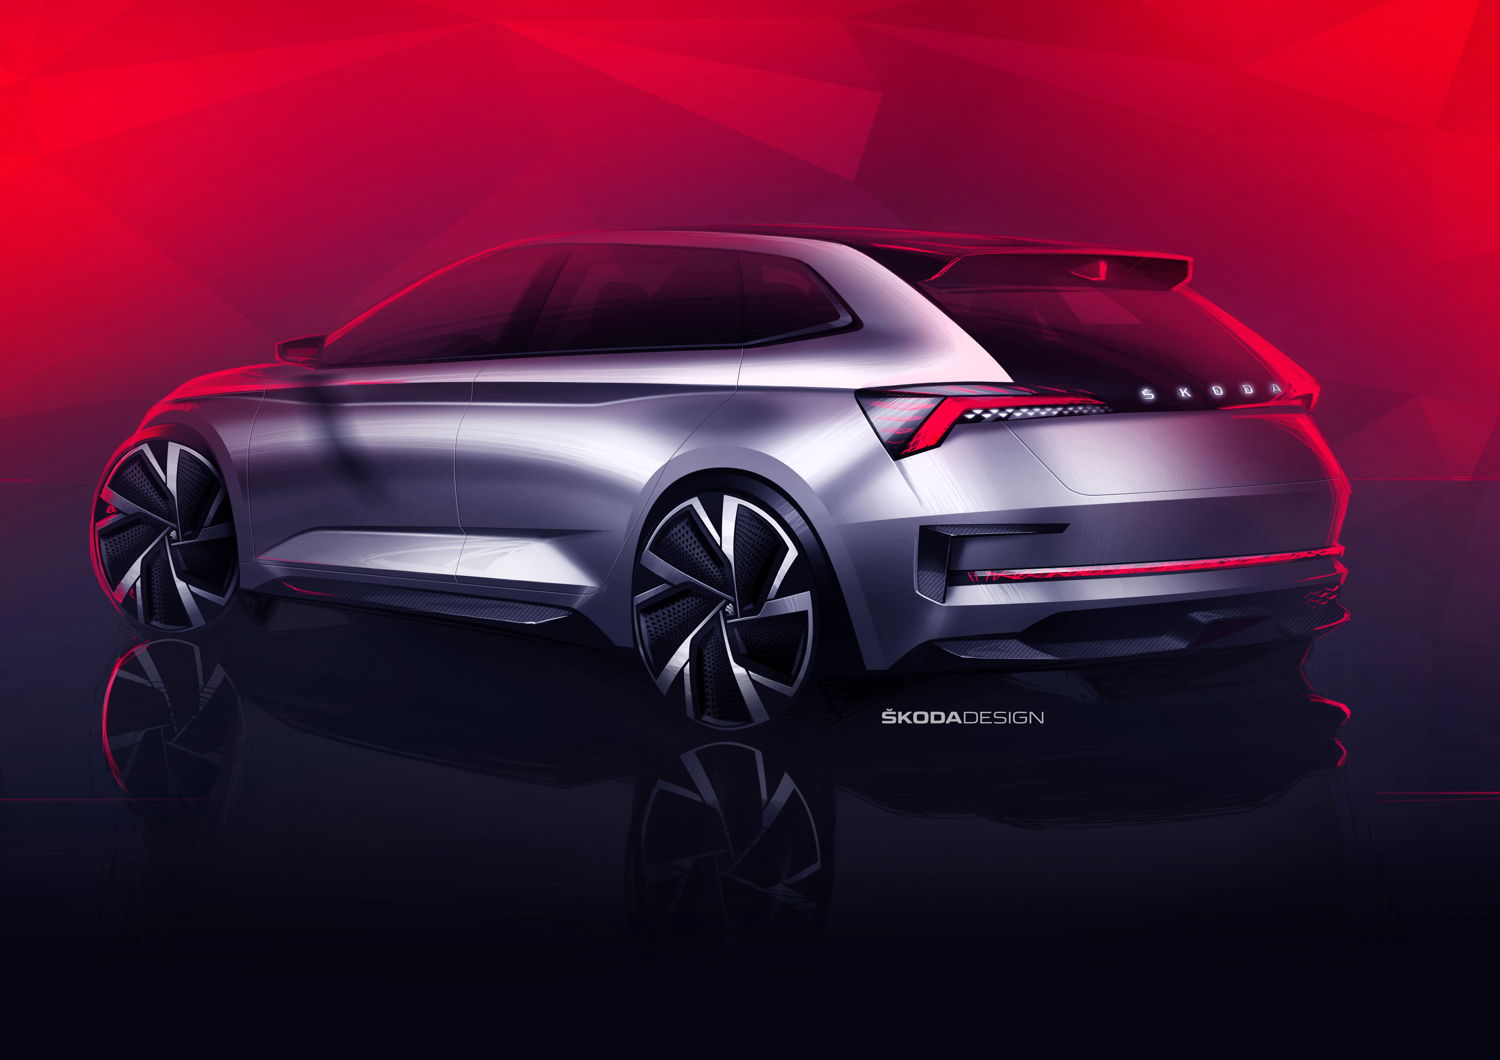 The ŠKODA VISION RS is 4,356 millimetres long and 1,810
millimetres wide, with a height of just 1,431 millimetres and a
wheelbase of 2,650 millimetres.